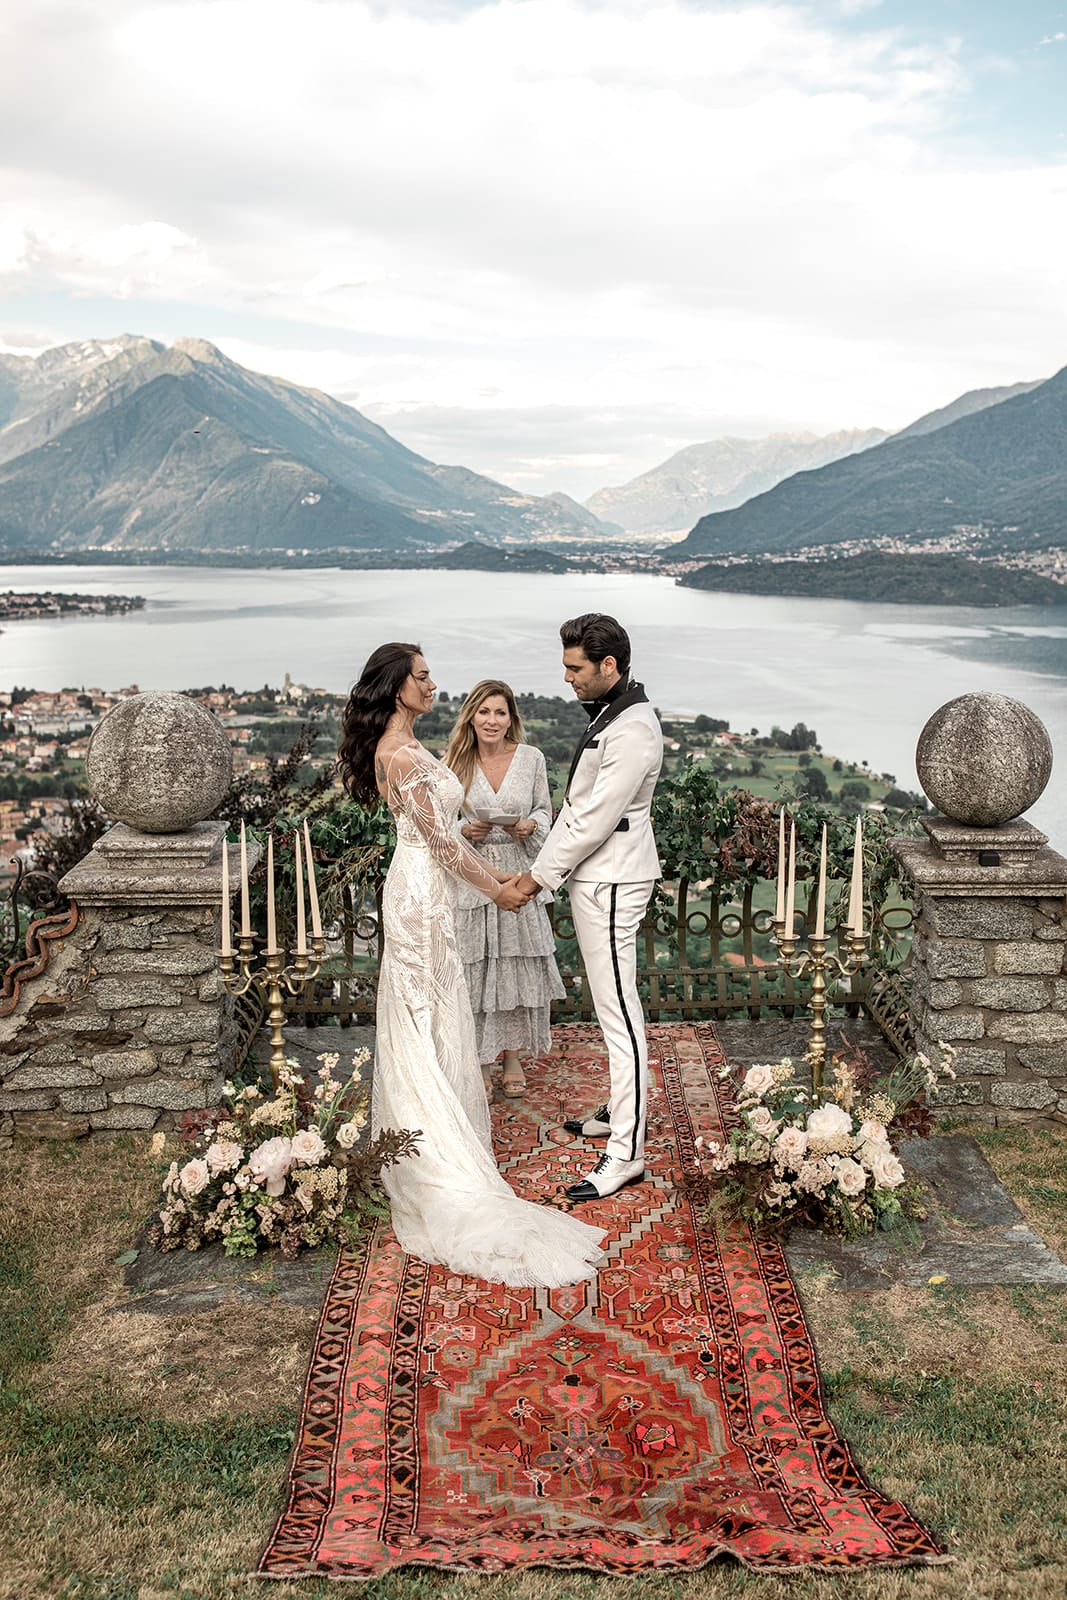 Bride and groom hold hands during vow renewal at Lake Como